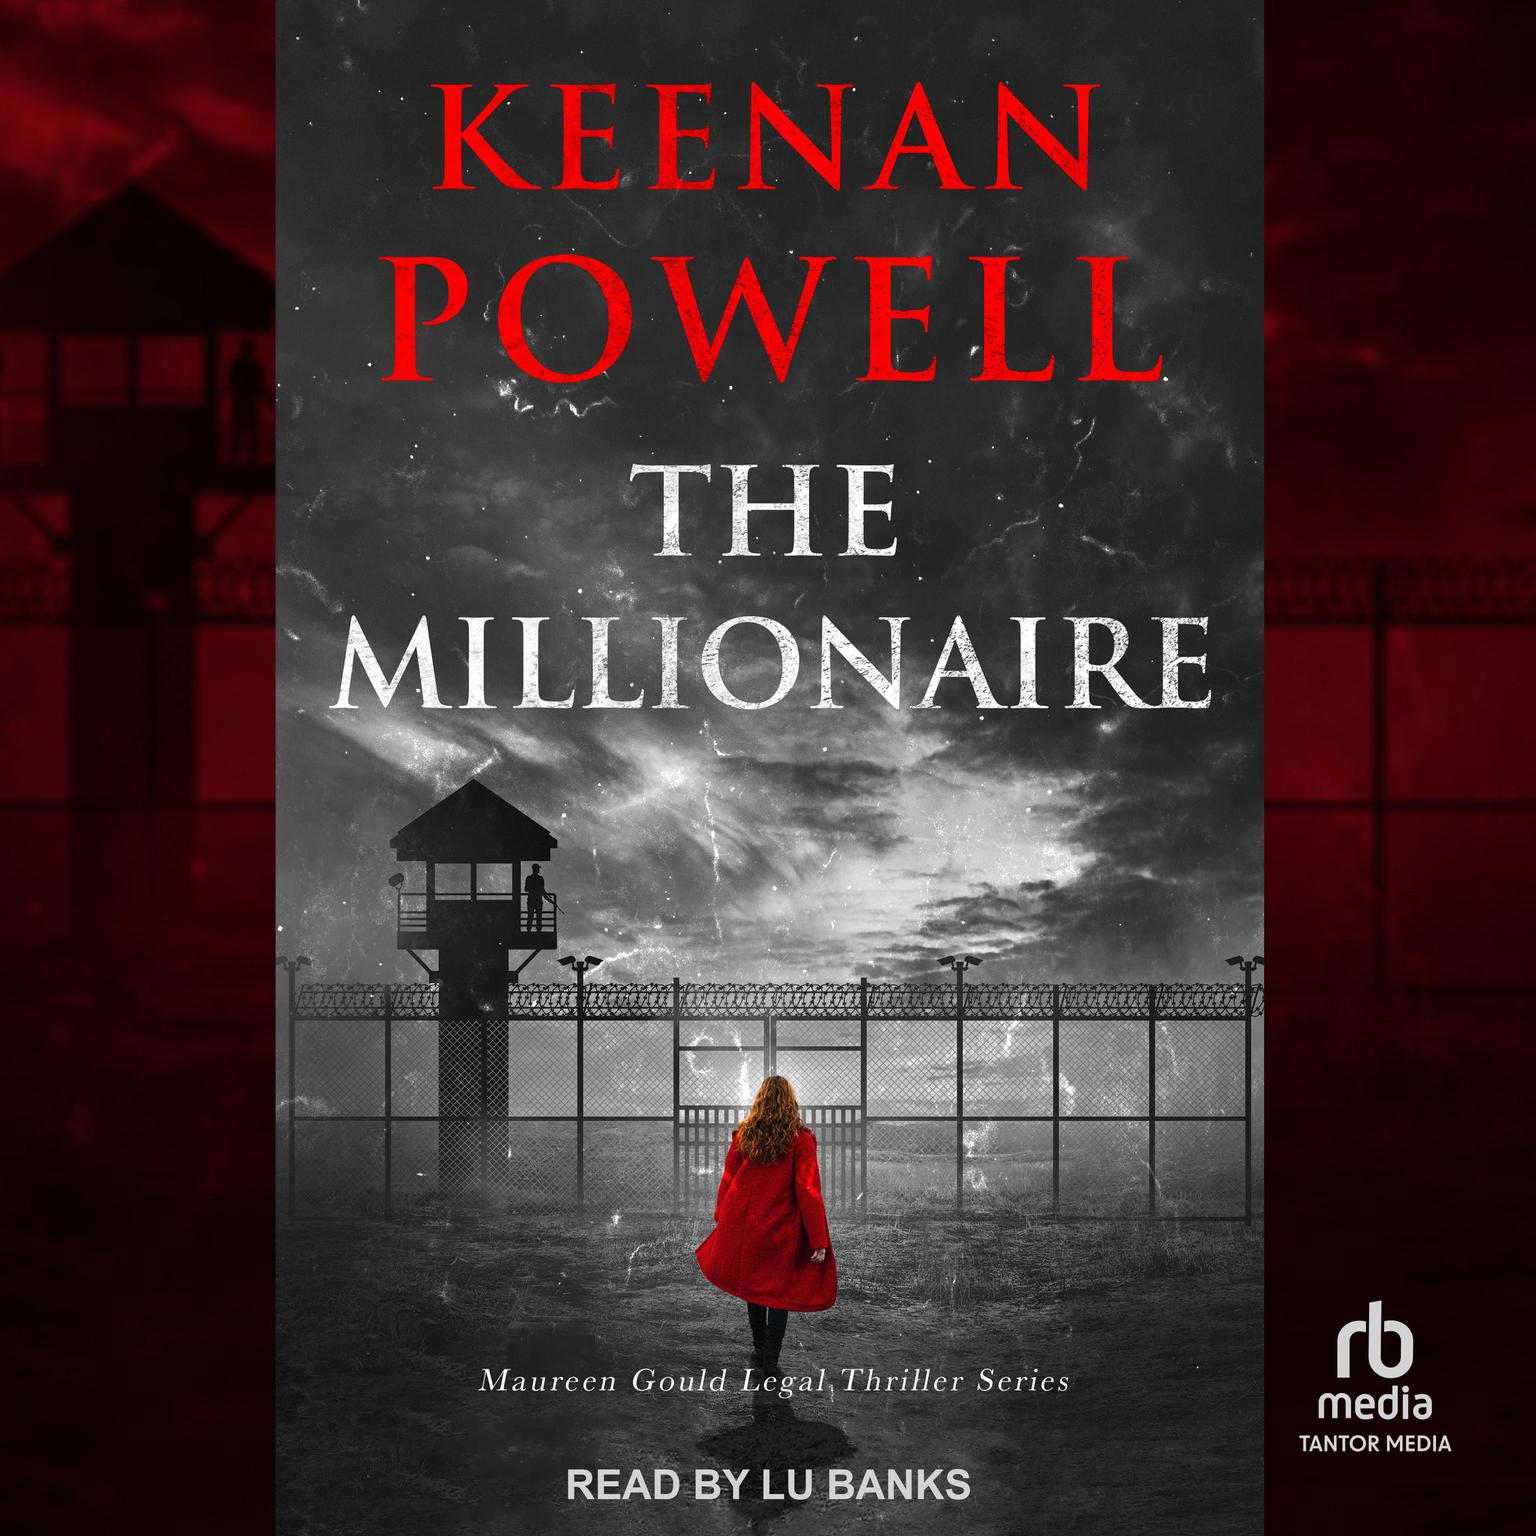 The Millionaire Audiobook, by Keenan Powell